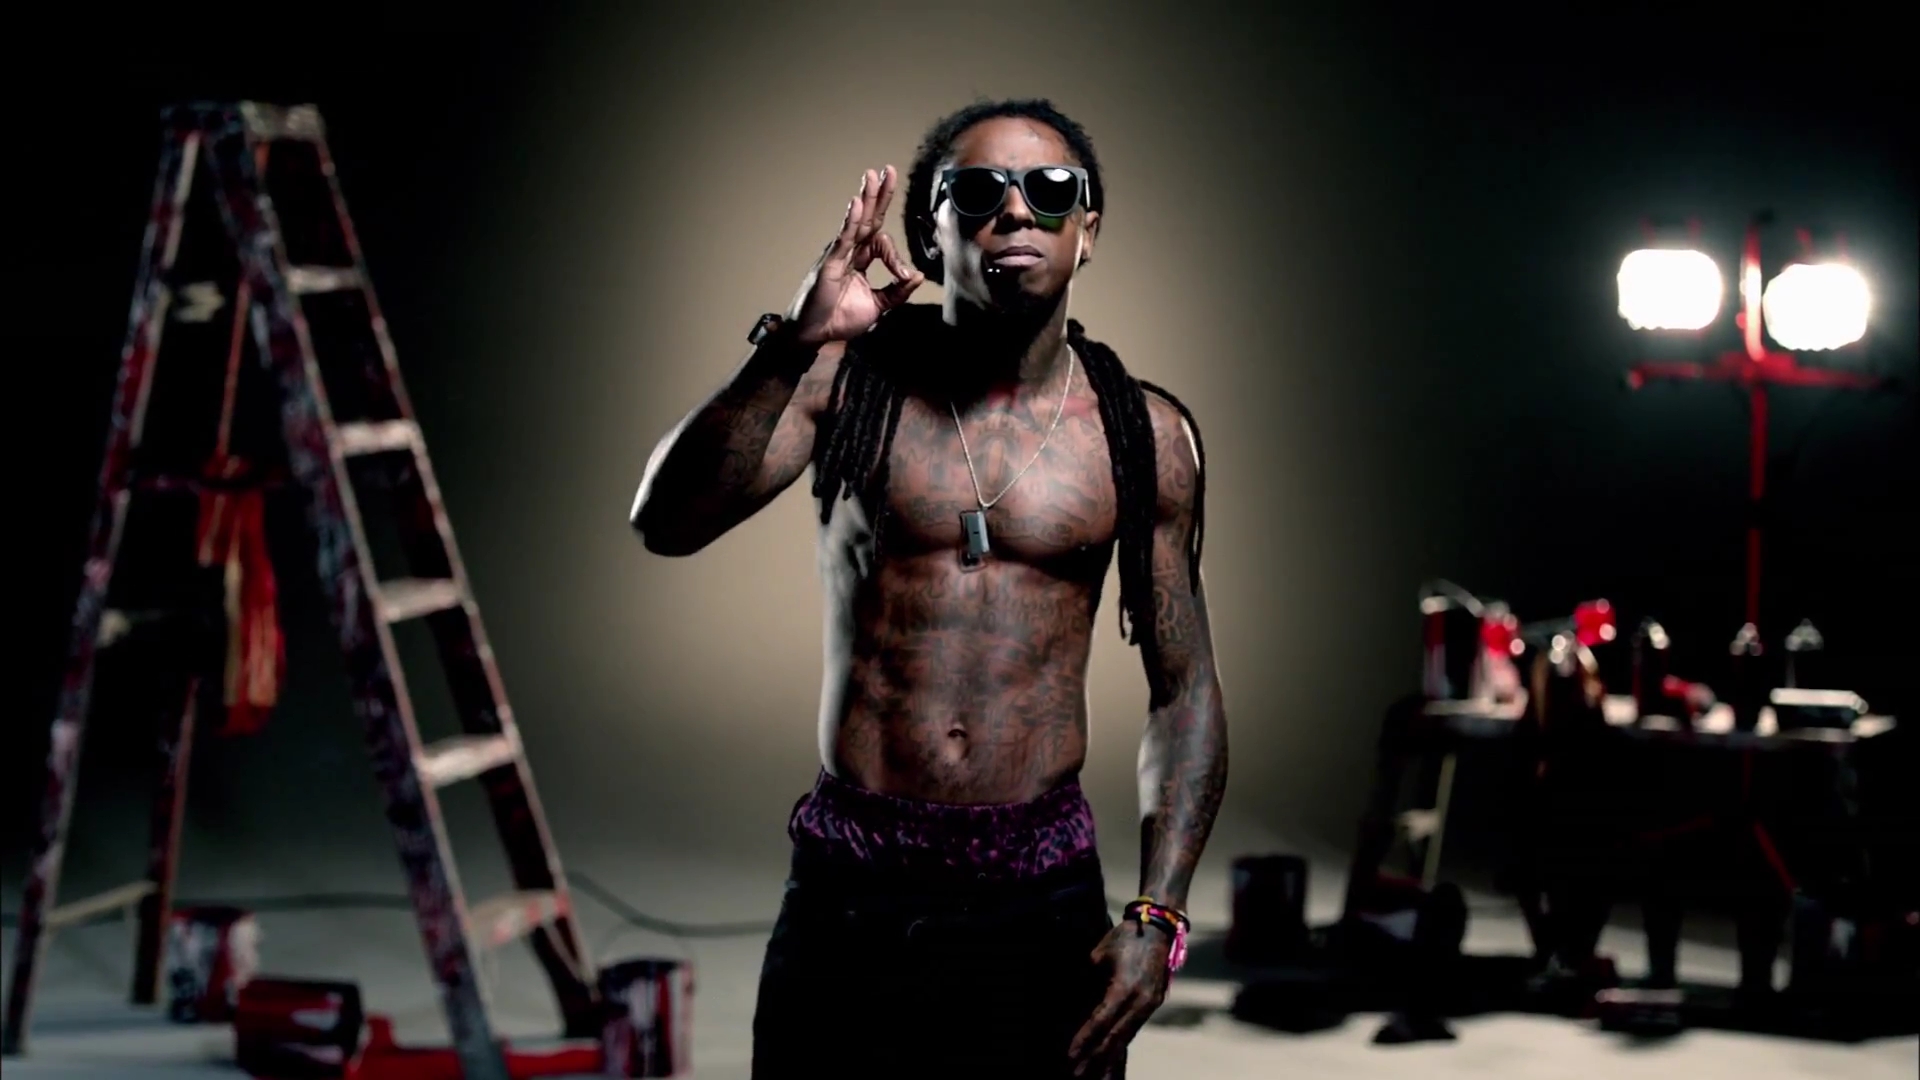 Lil Wayne Wallpapers   Wallpaper High Definition High Quality 1920x1080